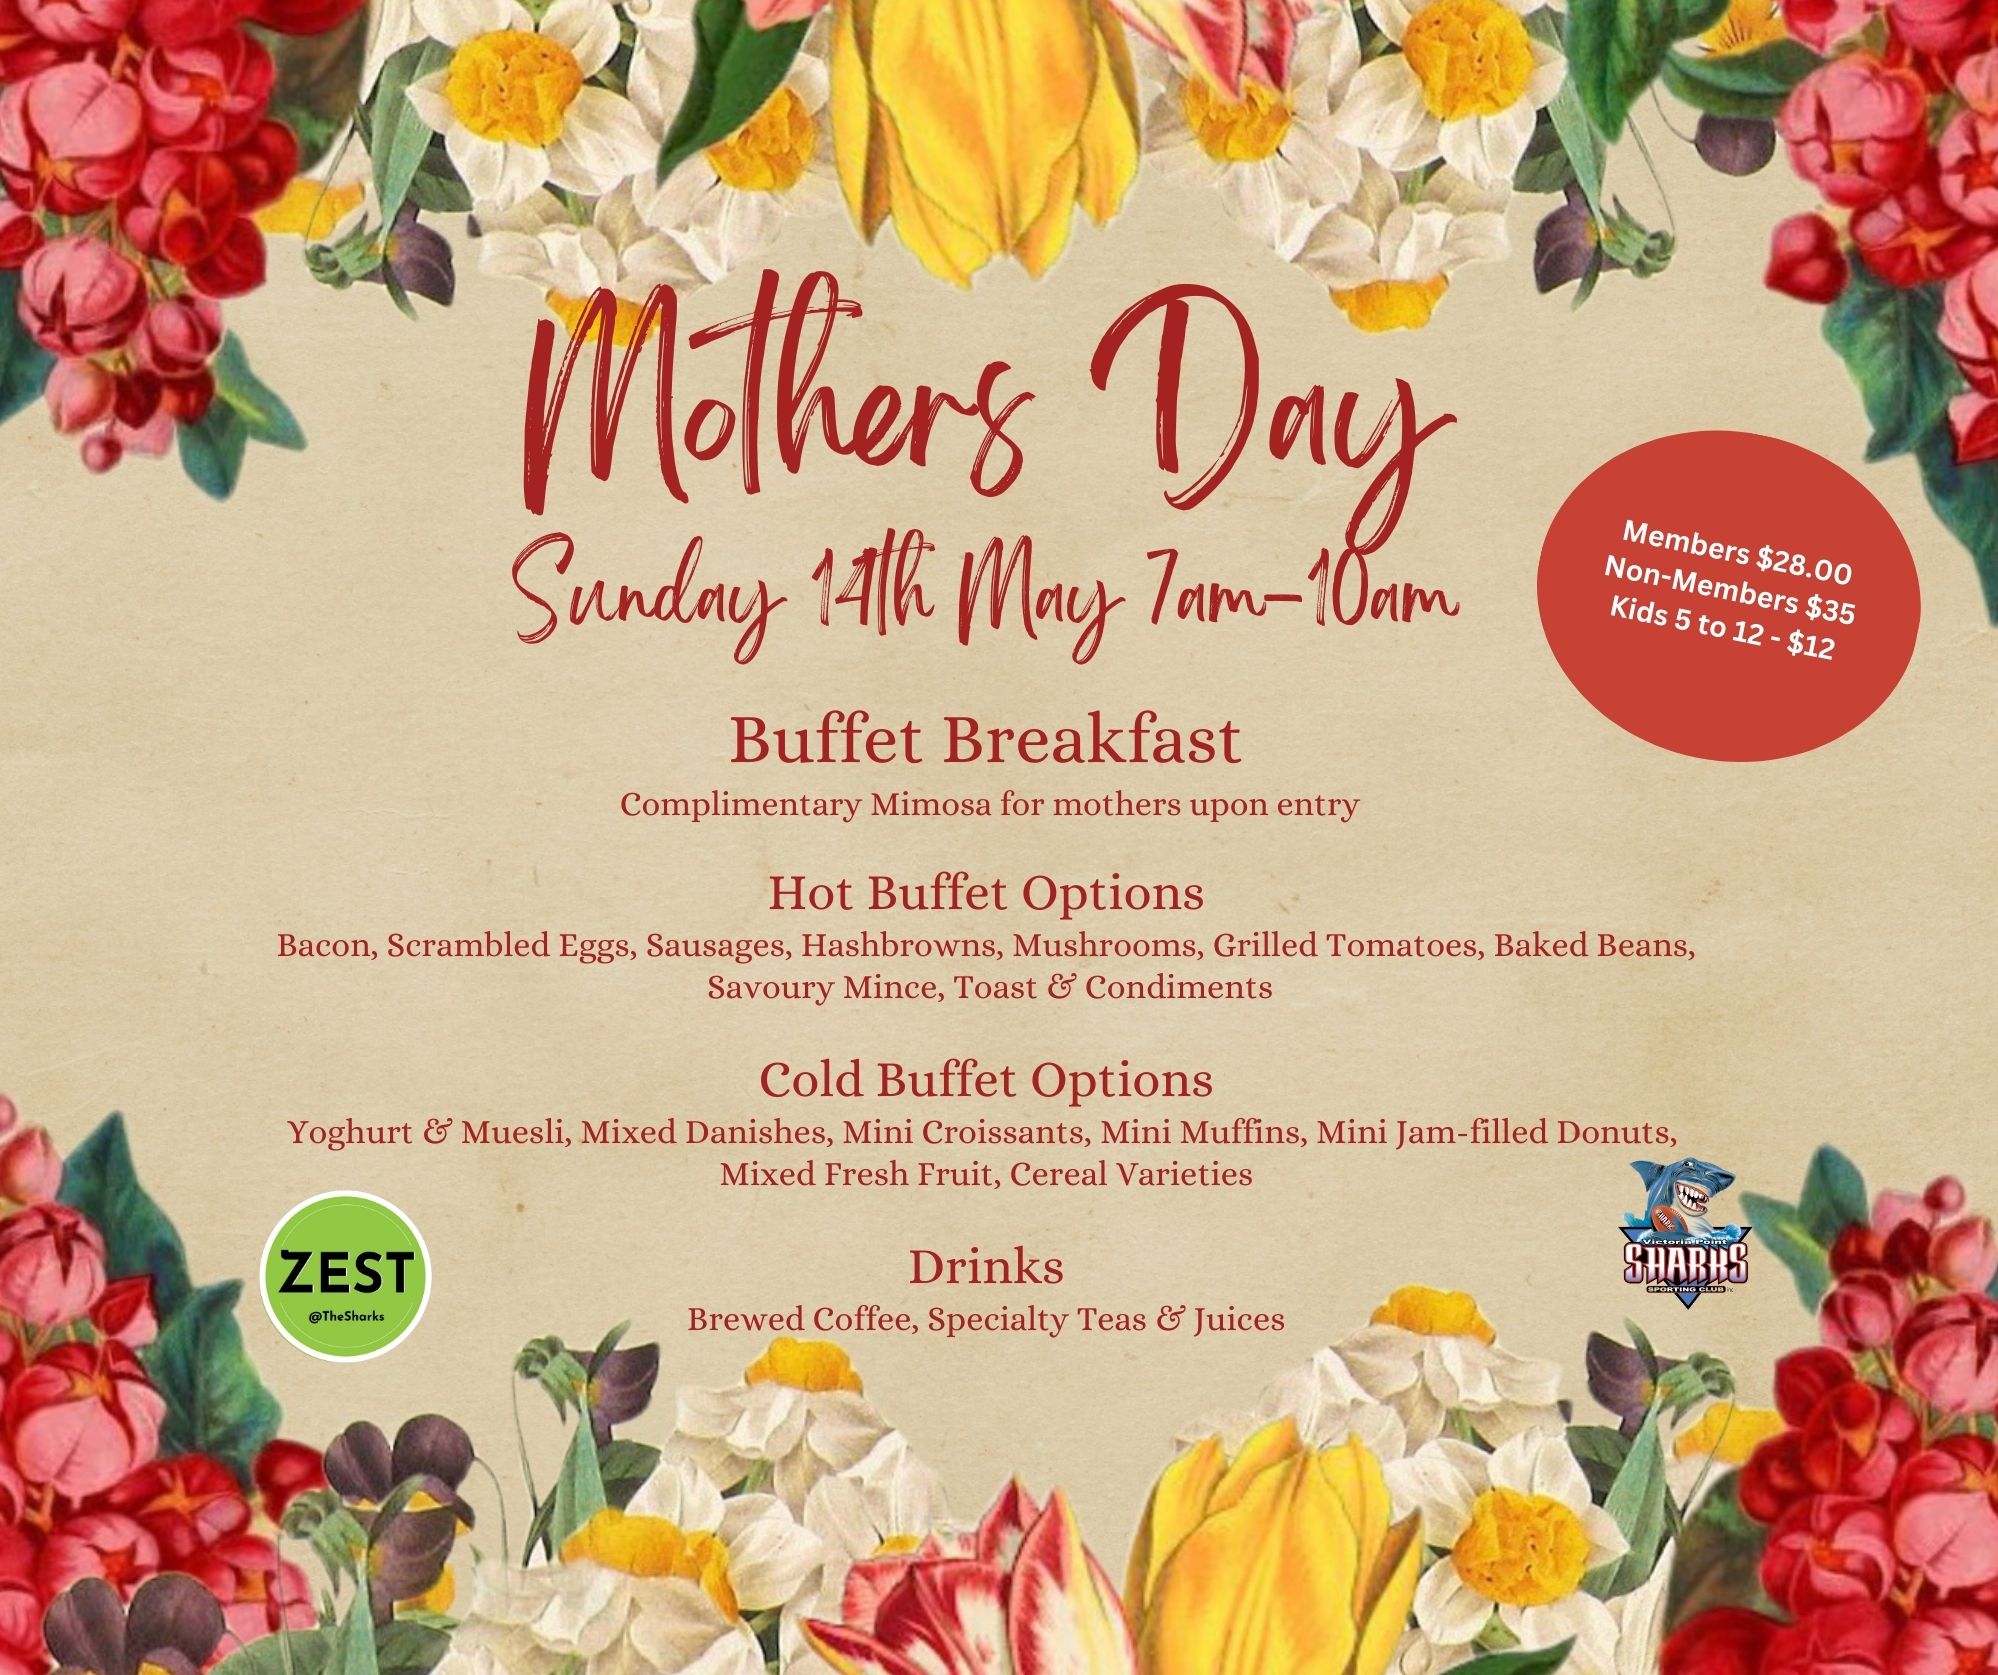 Mother's Day Buffet Breakfast Victoria Point Sharks Sporting Club